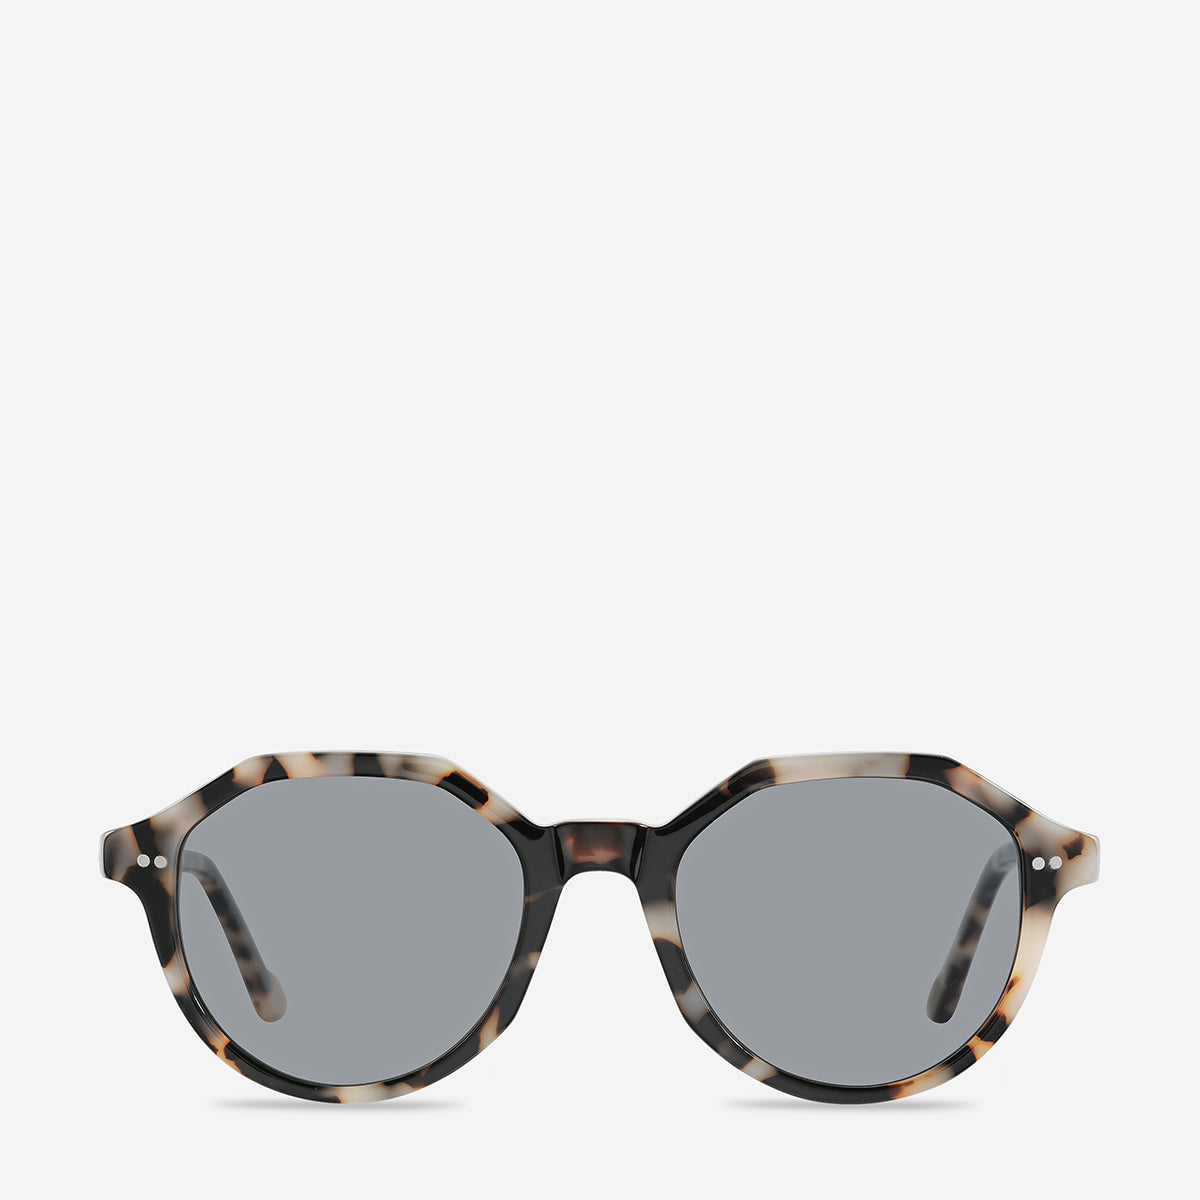 Apathy Sunnies - MOSS AND WILD